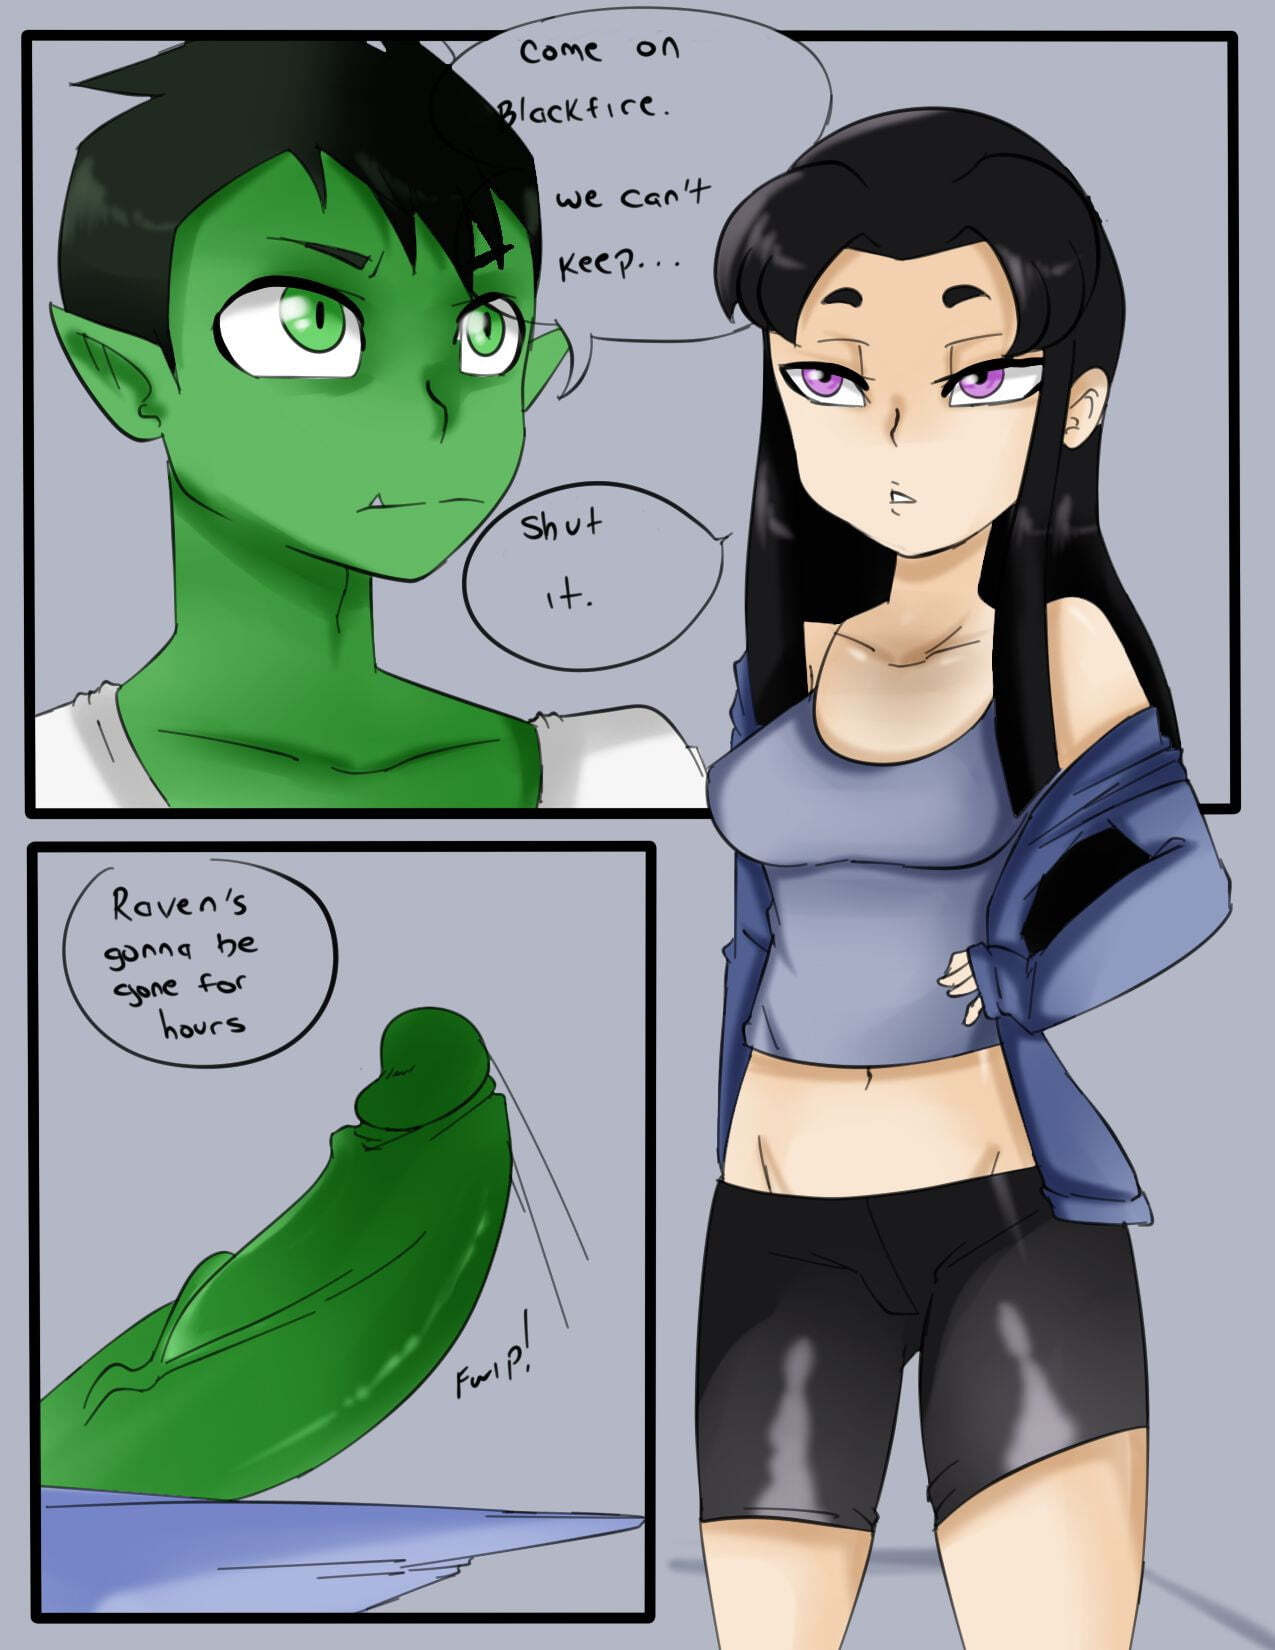 Alone with Blackfire - Page 1